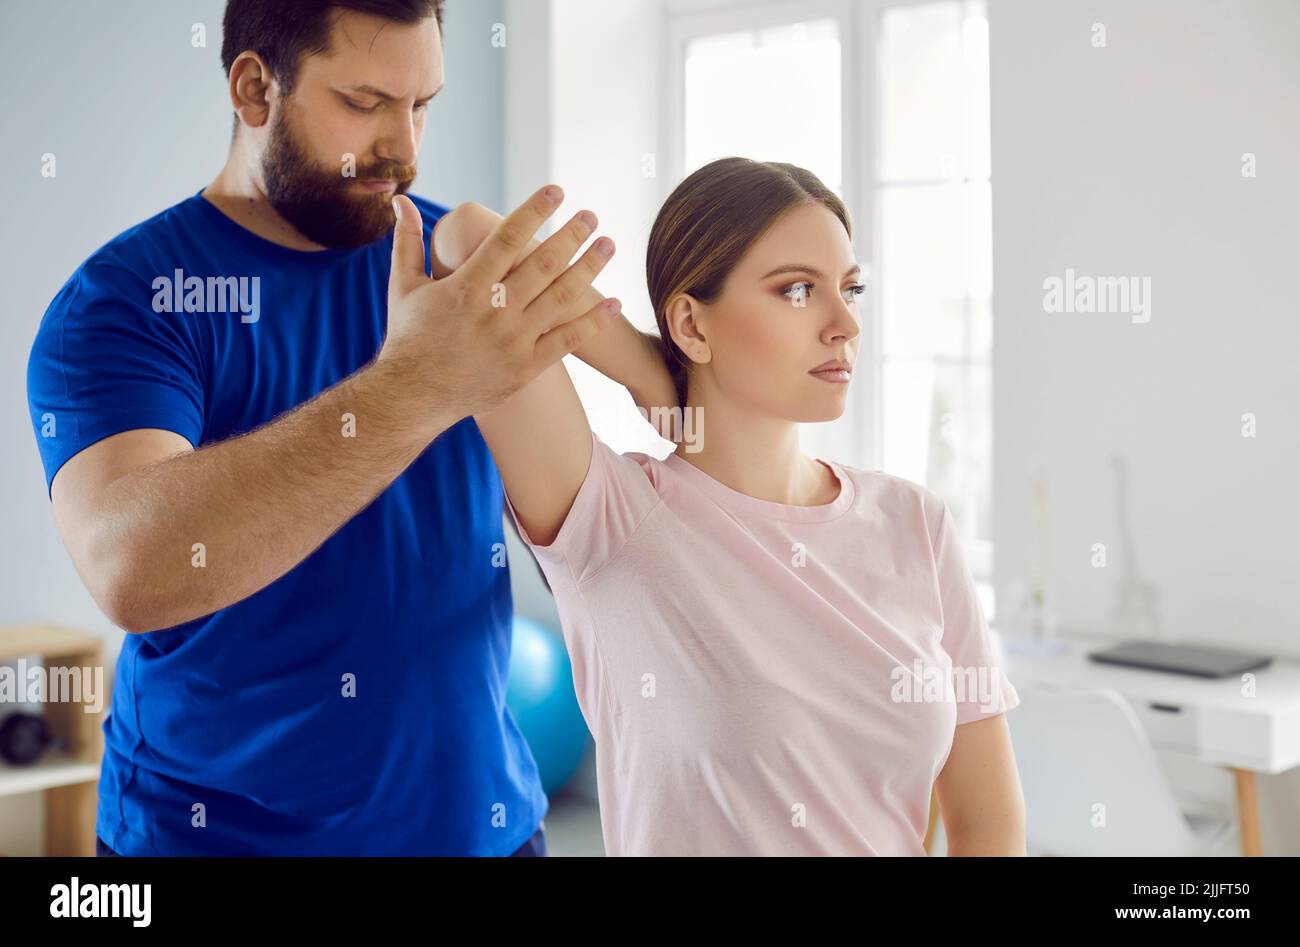 Serious male physiotherapist examines injured arm of female patient in medical clinic. Stock Photo